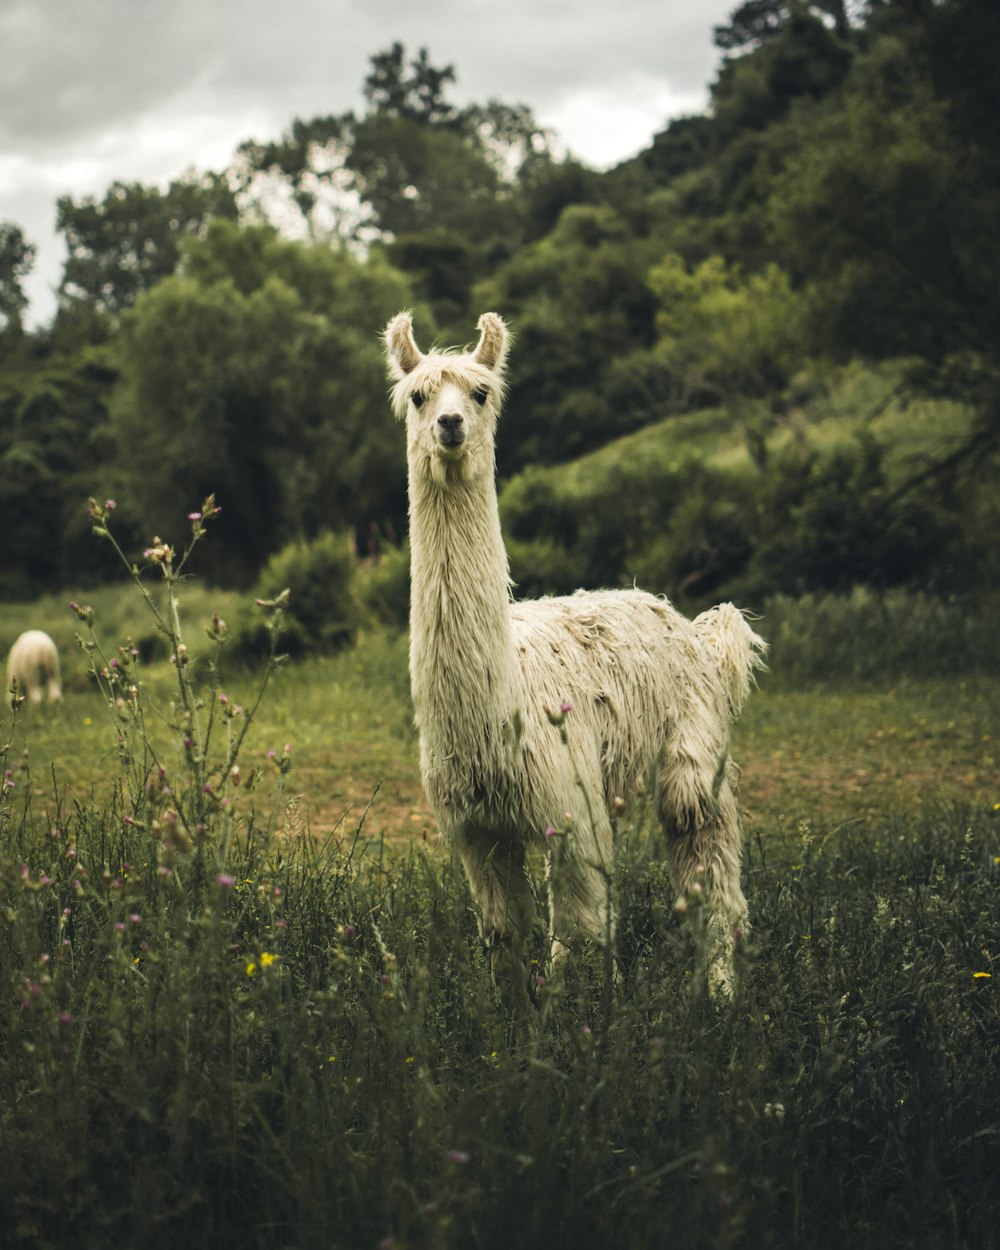 white Llama on green grass field surrounded by trees during daytime